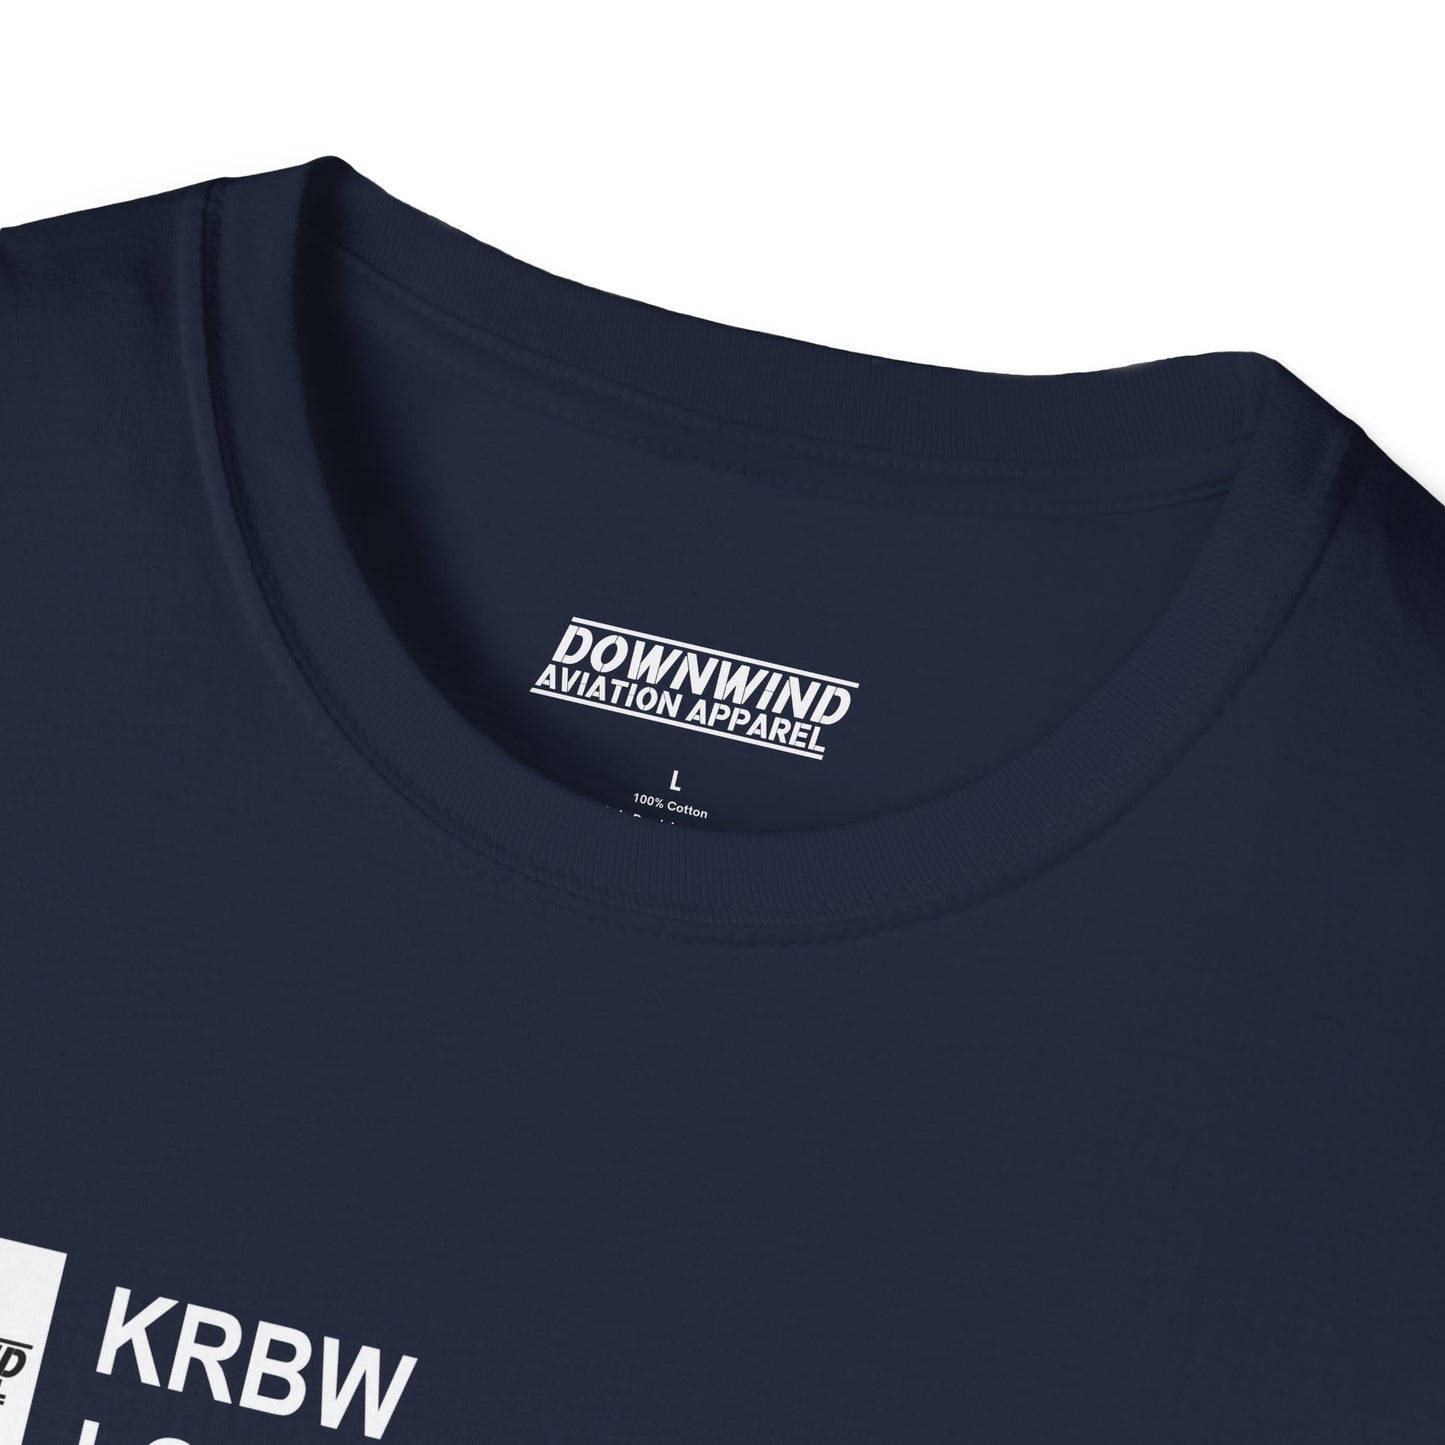 KRBW / Lowcounty Airport T-Shirt